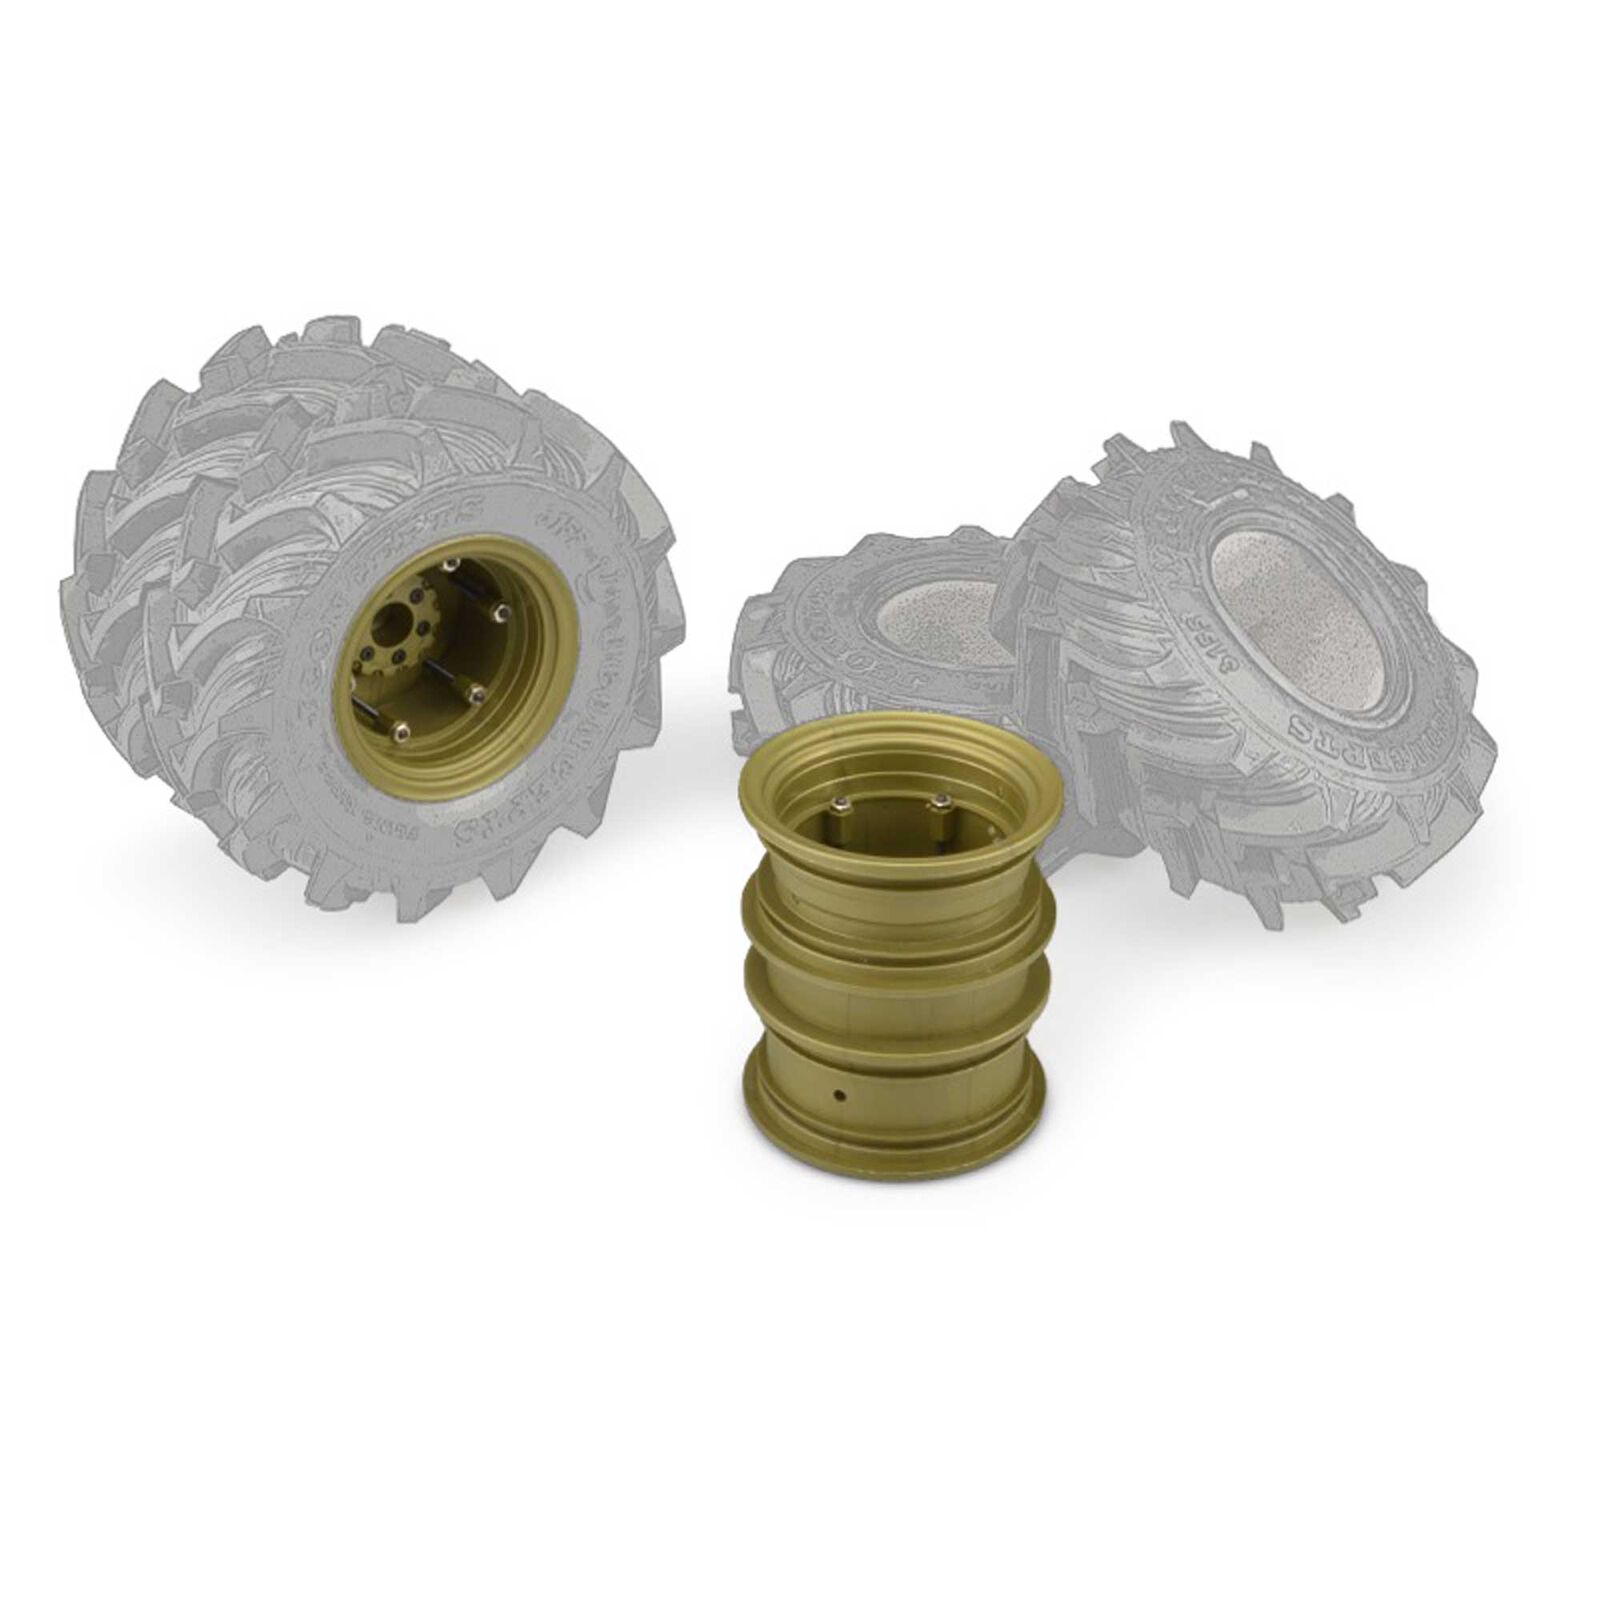 Krimson Dually 2.6 Dual Wheels with Adapters, Gold/Olive (2)